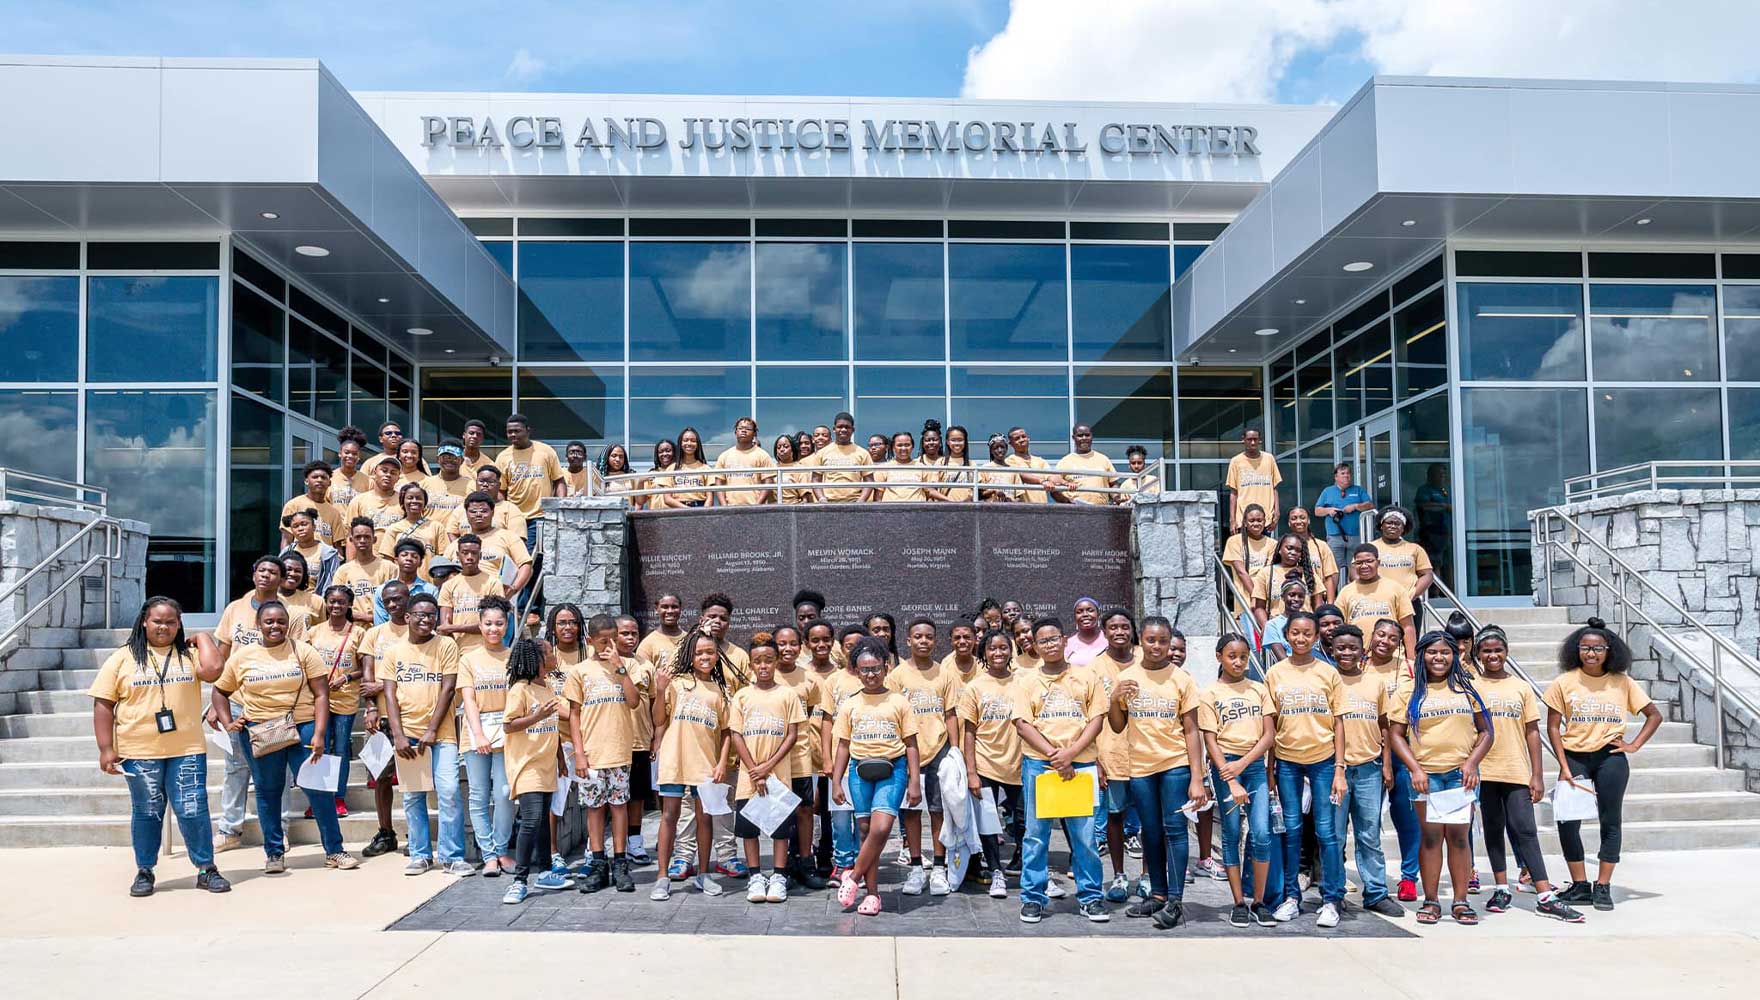 A large group of high school students in matching t-shirts pose outside the Peace and Justice Memorial Center.